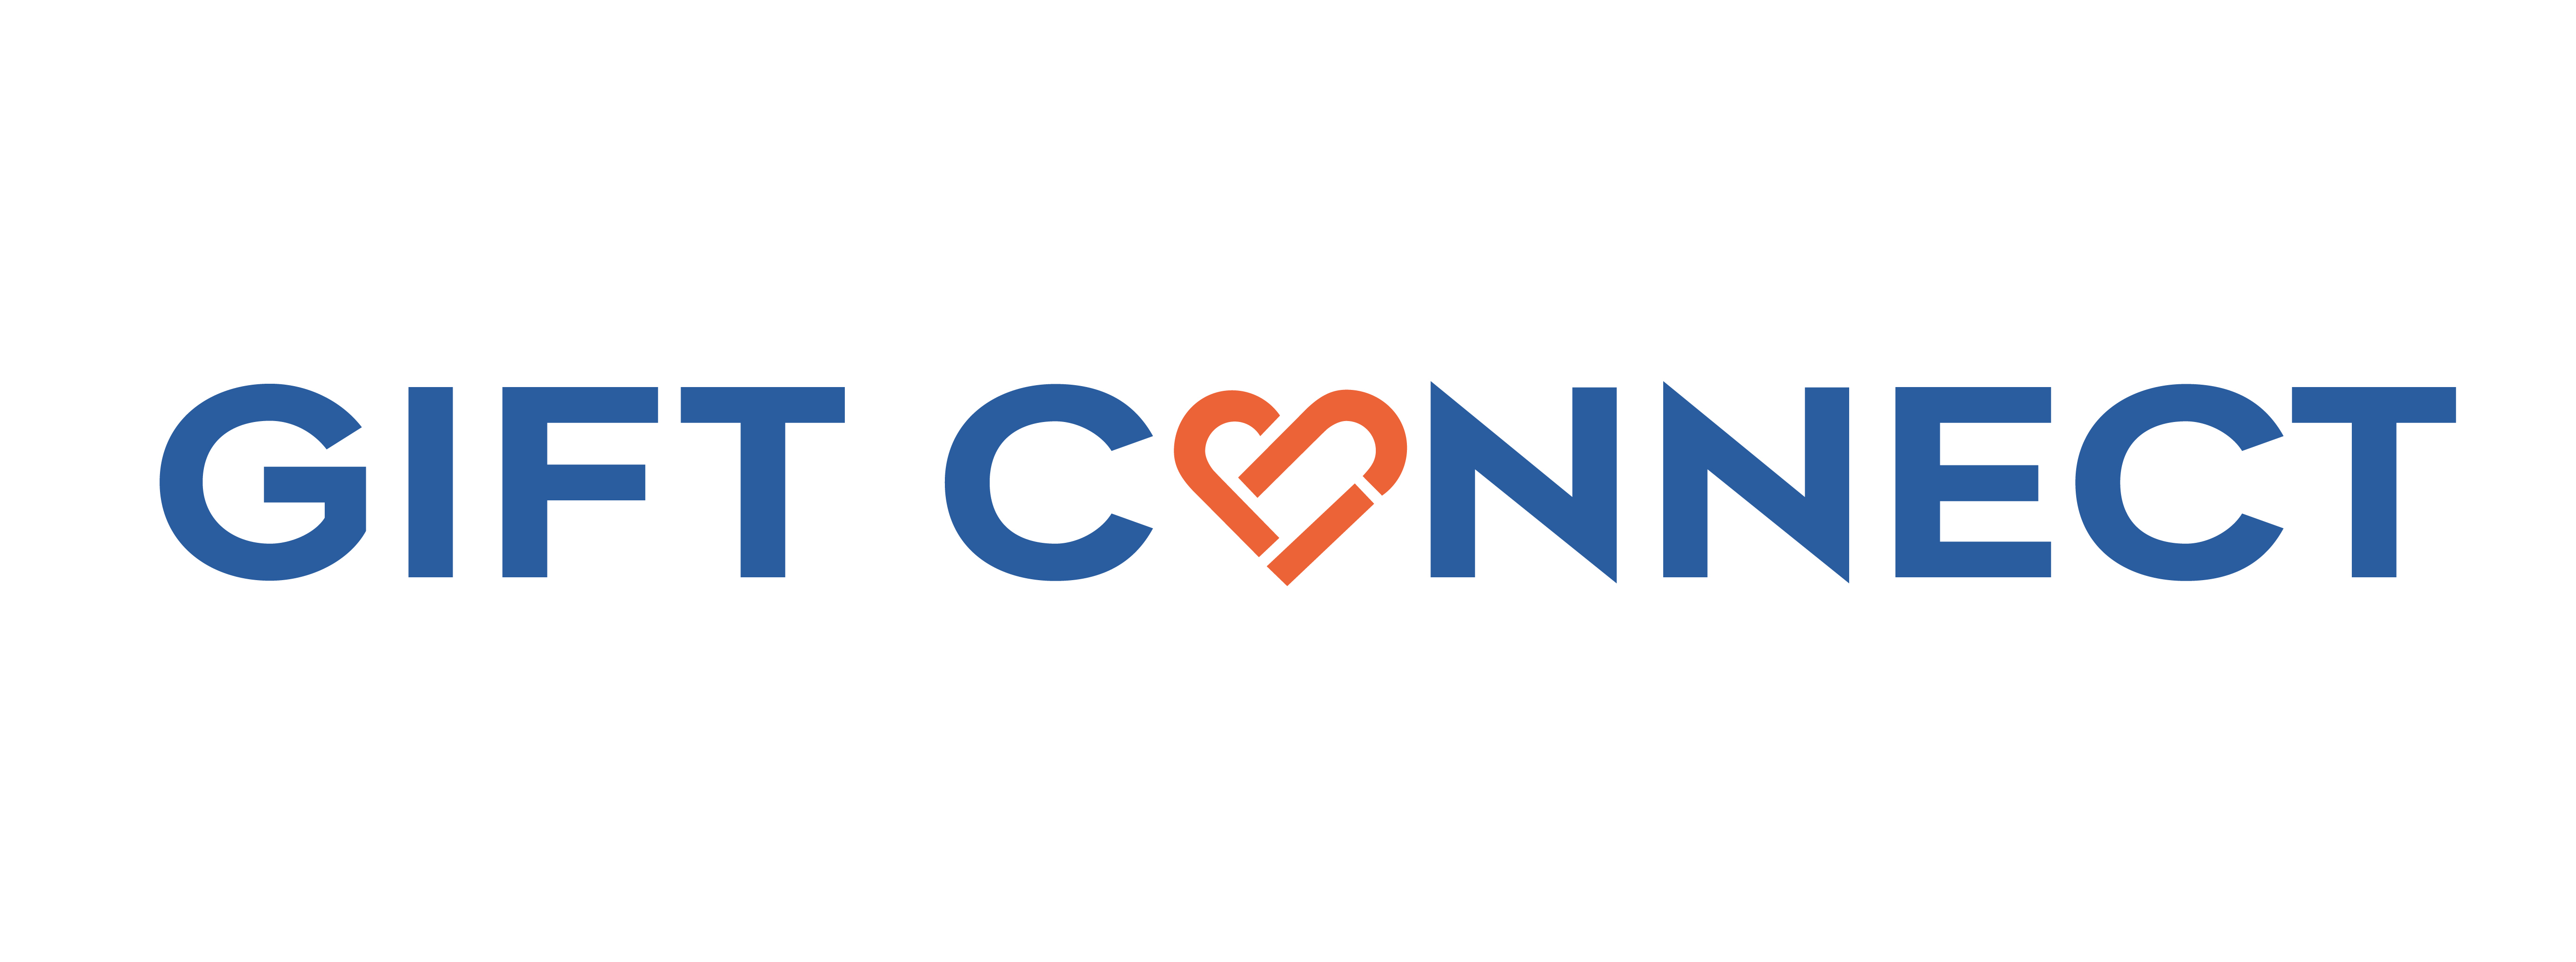 Gift Connect logo